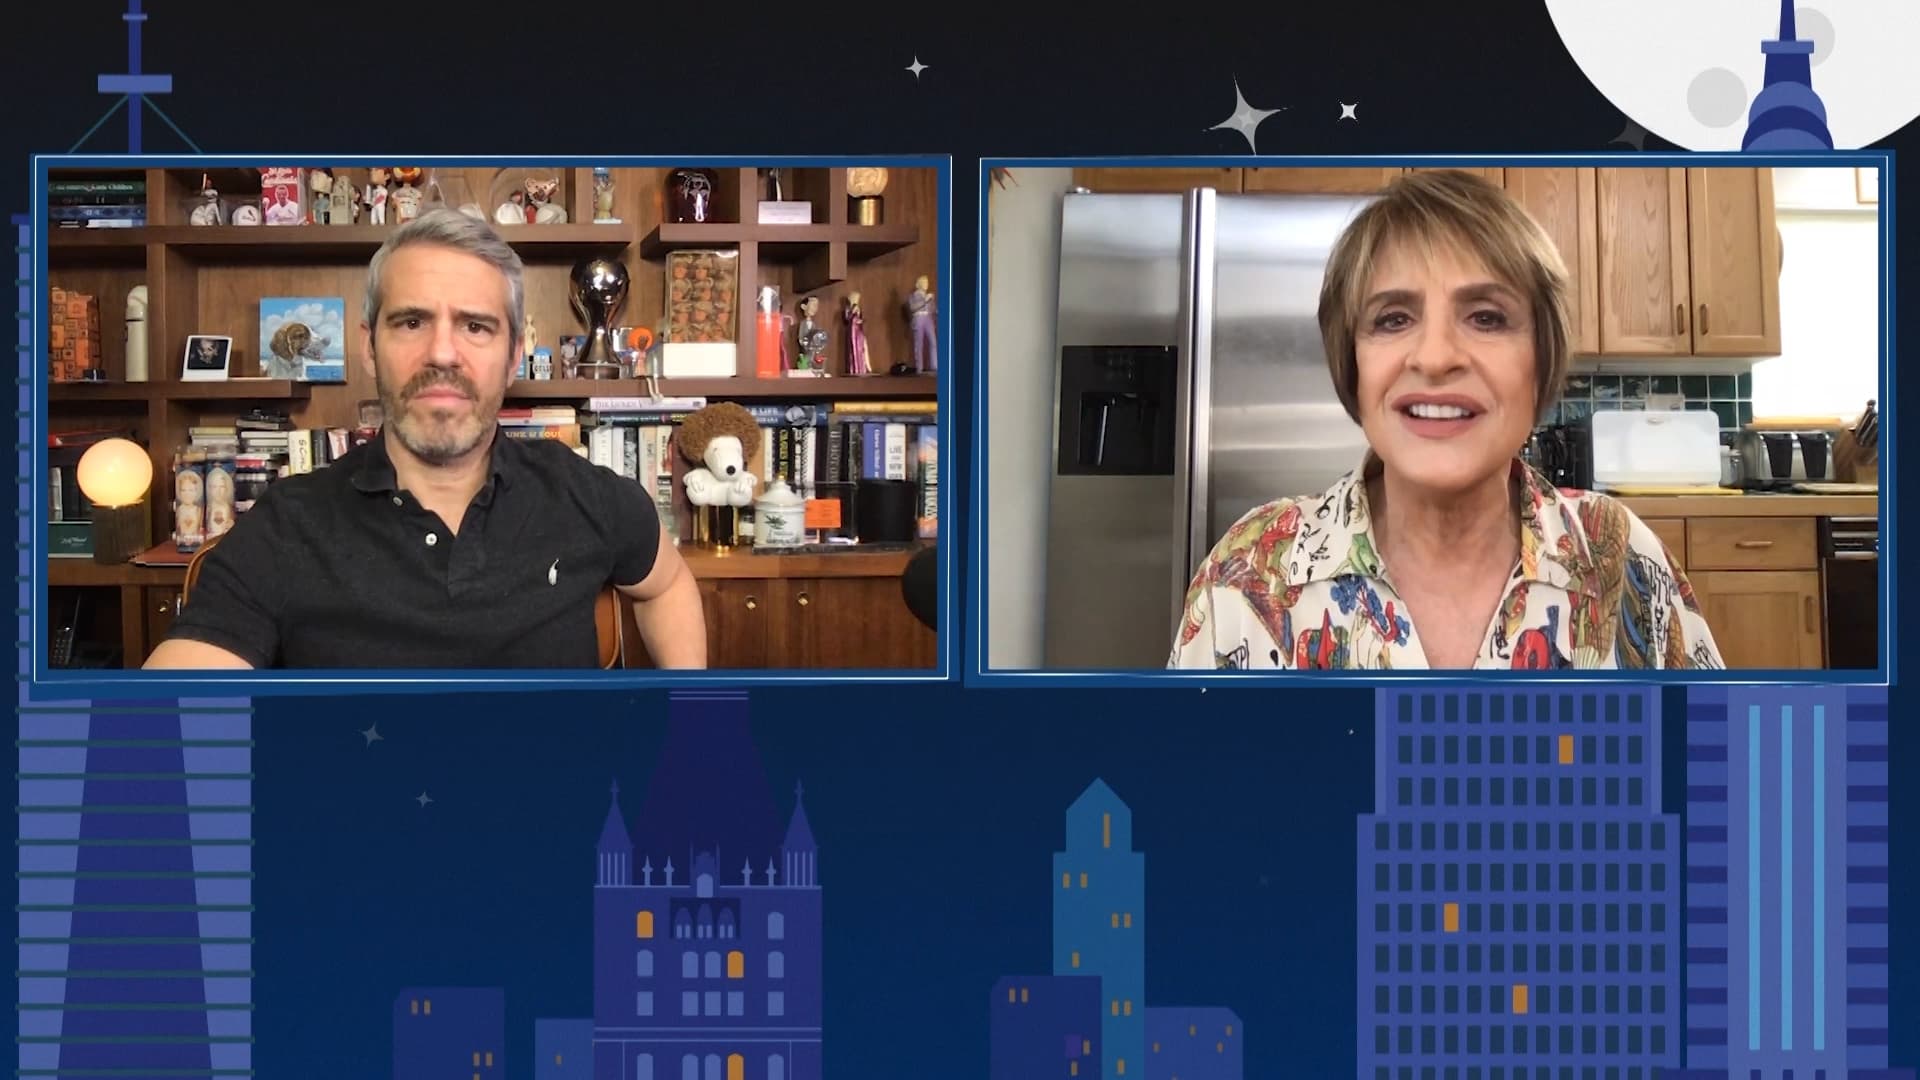 Watch What Happens Live with Andy Cohen Staffel 17 :Folge 73 